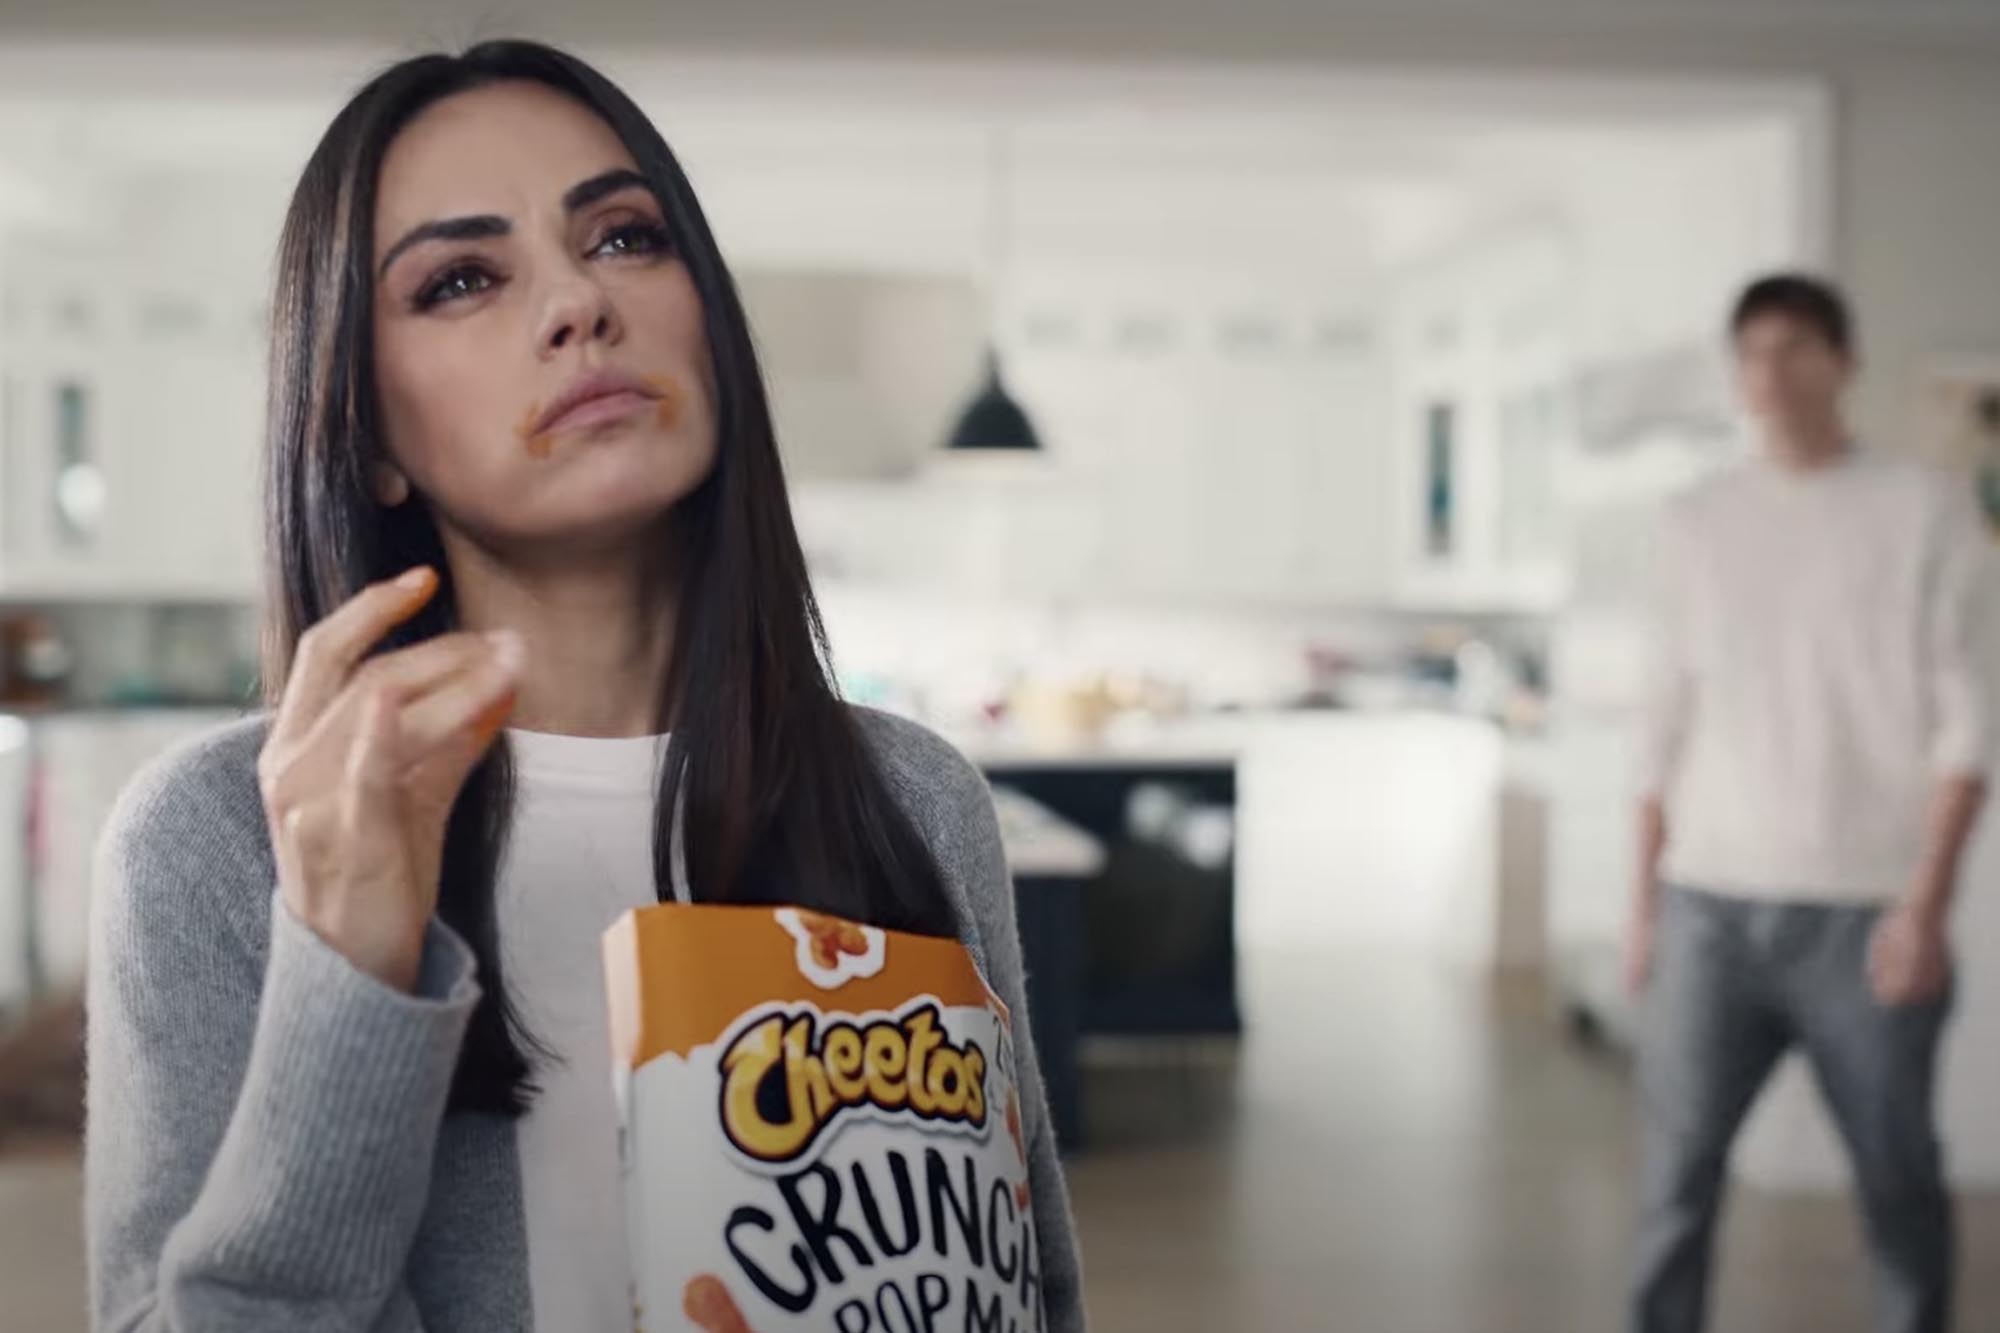 Mila Kunis swears "It Wasn't Me" as she cheats husband Ashton Kutcher out of his Cheetos Crunch Pop Mix in hilarious Super Bowl LV ad, featuring reggae singer Shaggy.